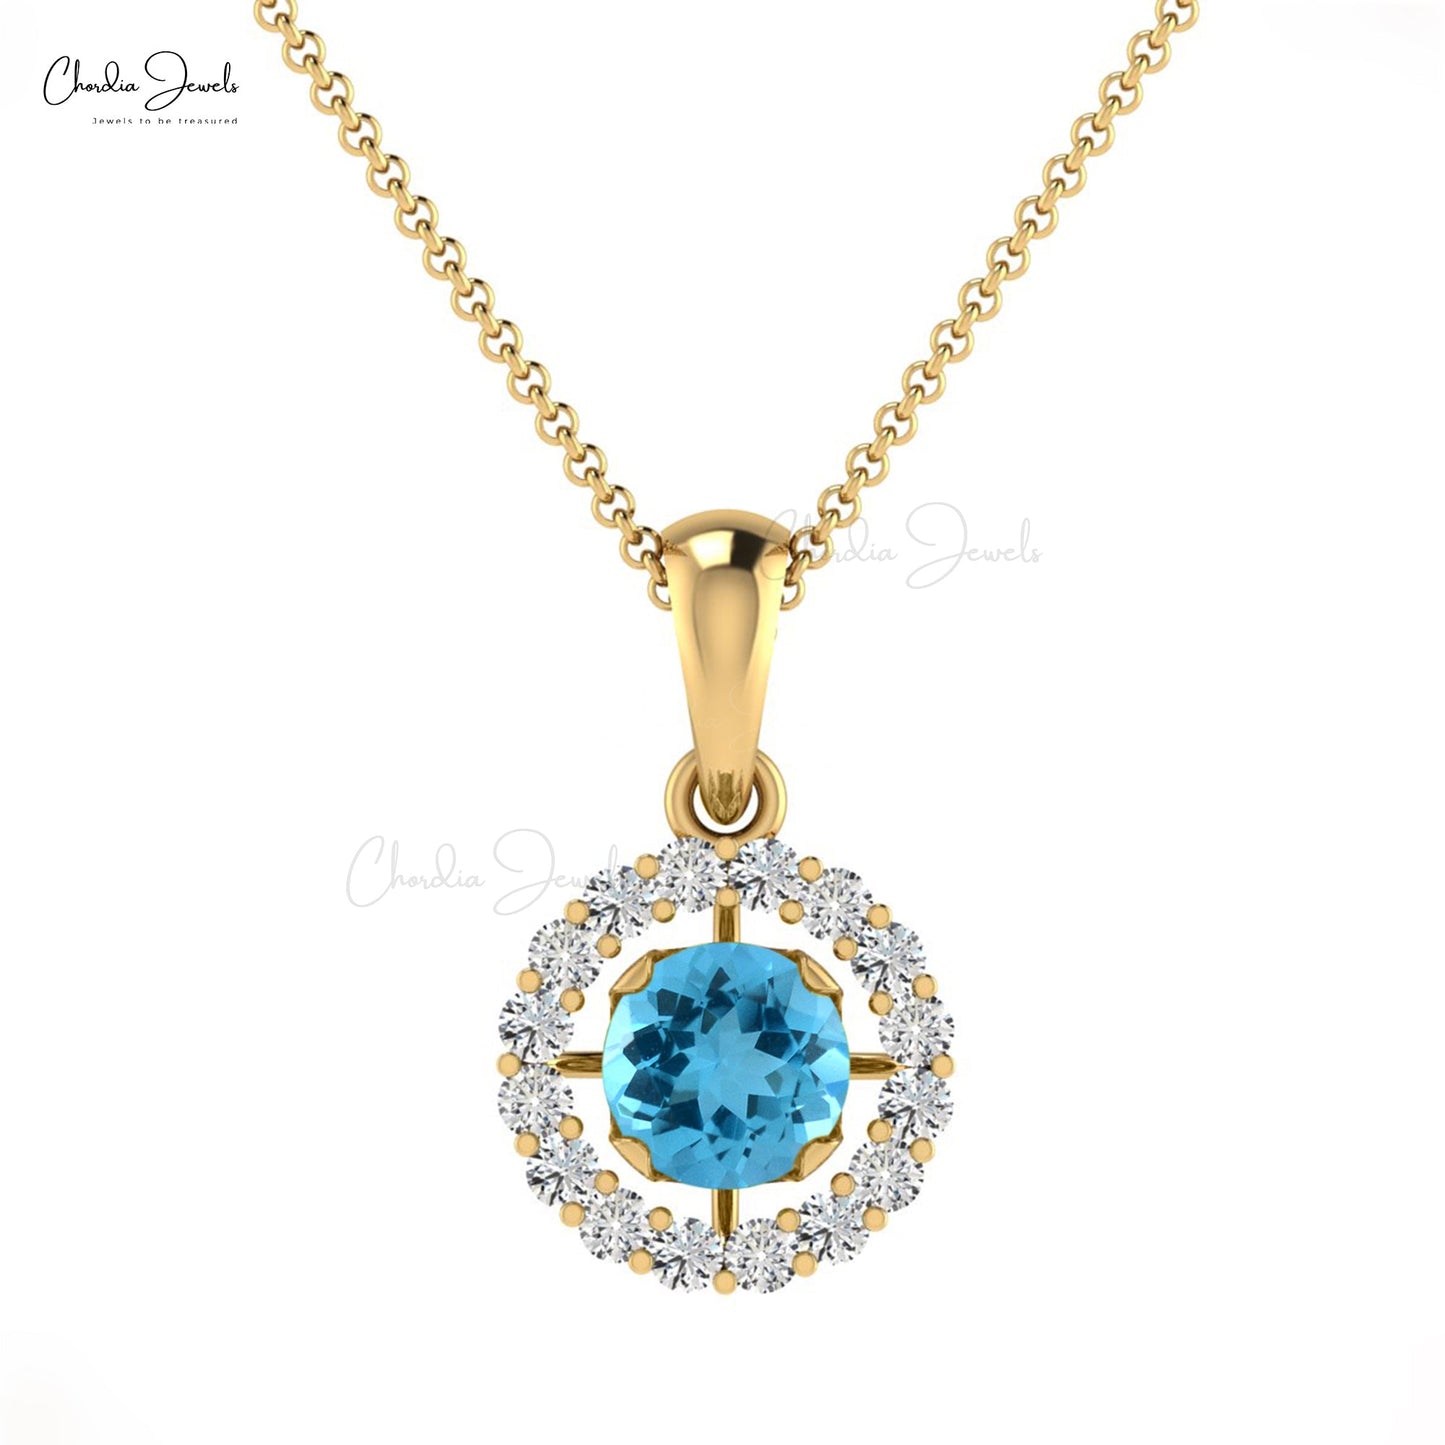 Precious Round Swiss Blue Topaz and Diamond 14K Gold Halo Pendant for Her